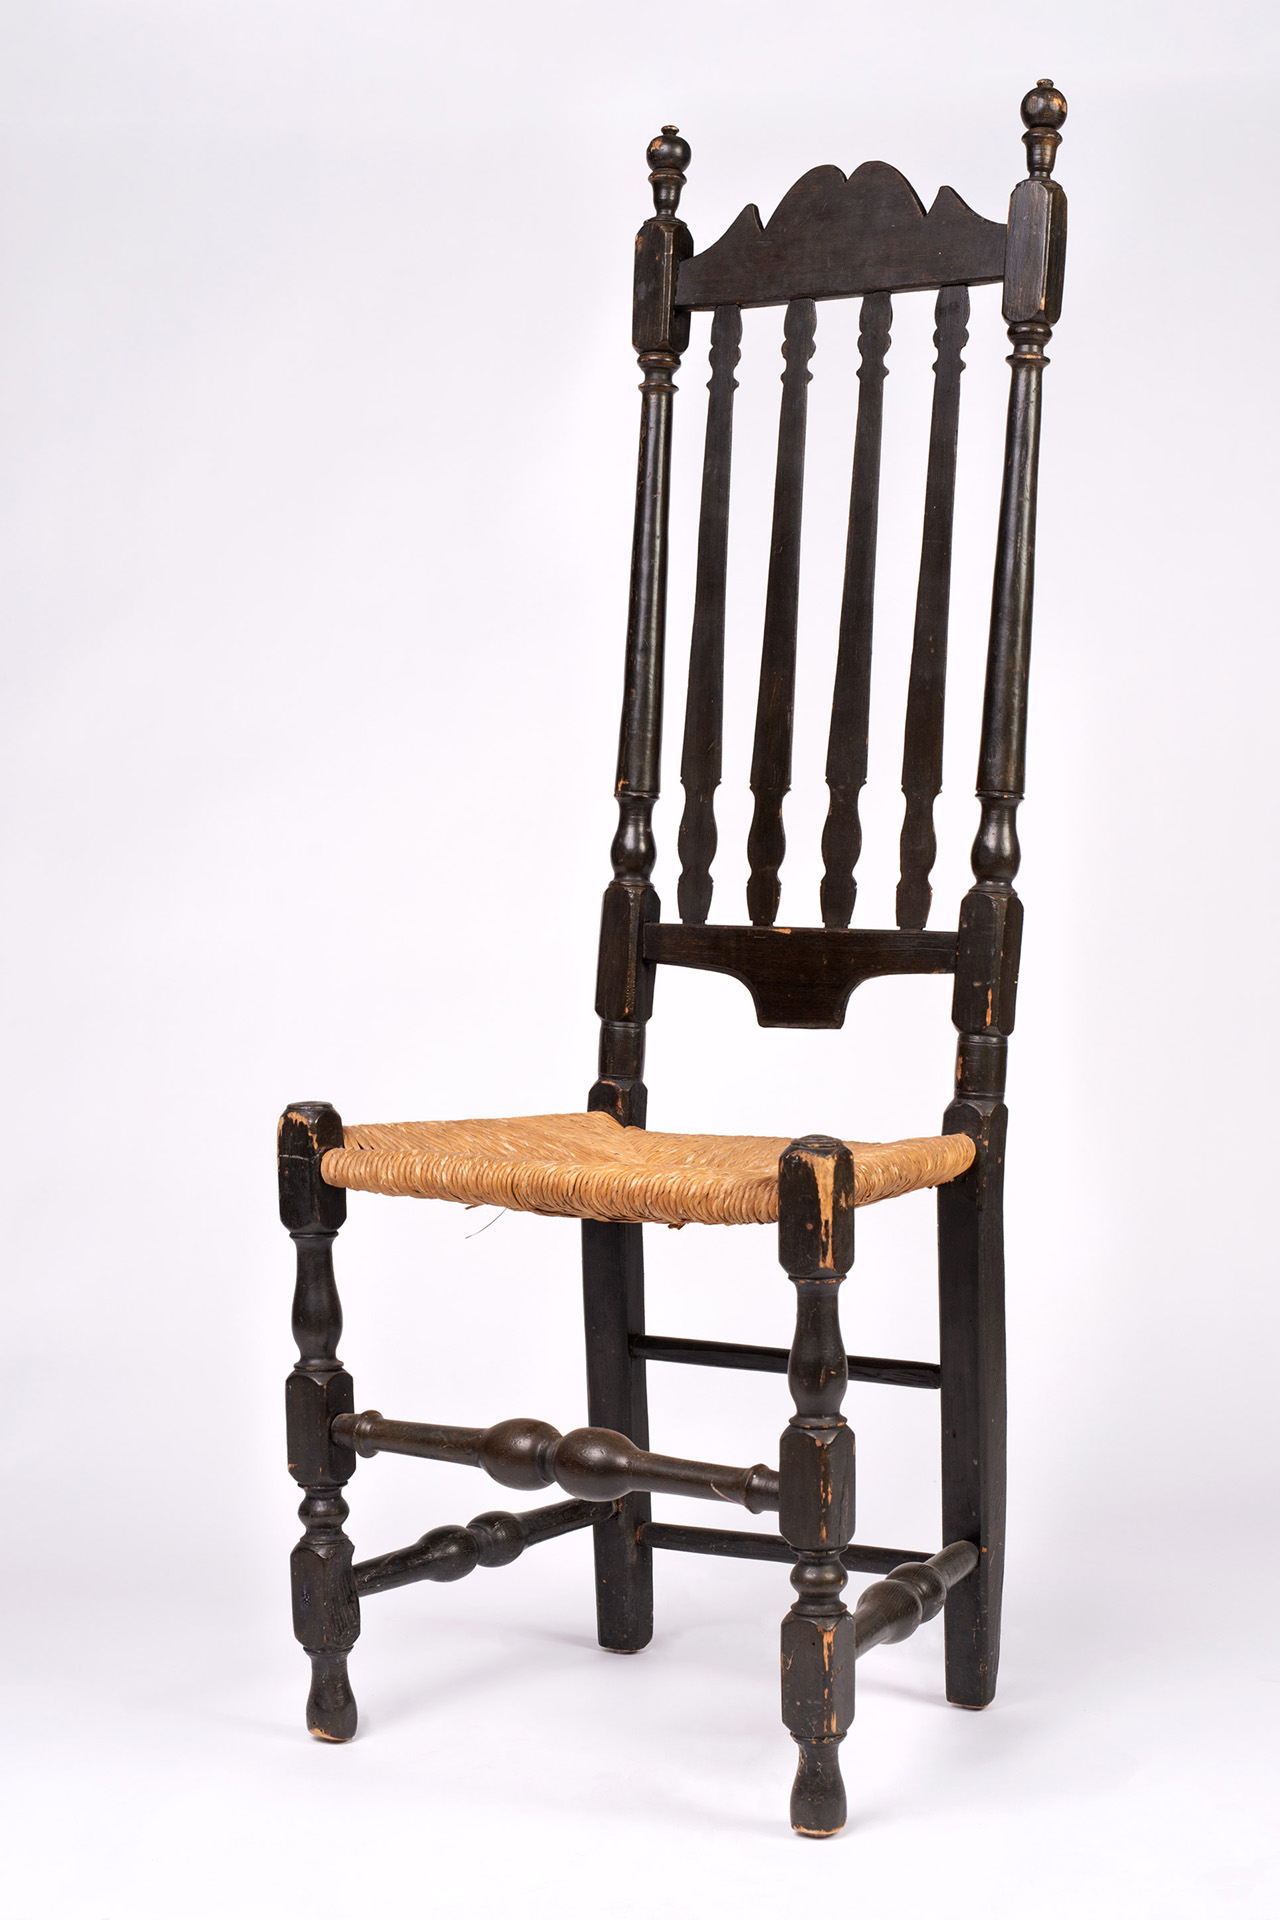 A rare William and Mary period banister backed sidechair with canted back, shaped crest, well-turned finials, posts and stretchers.